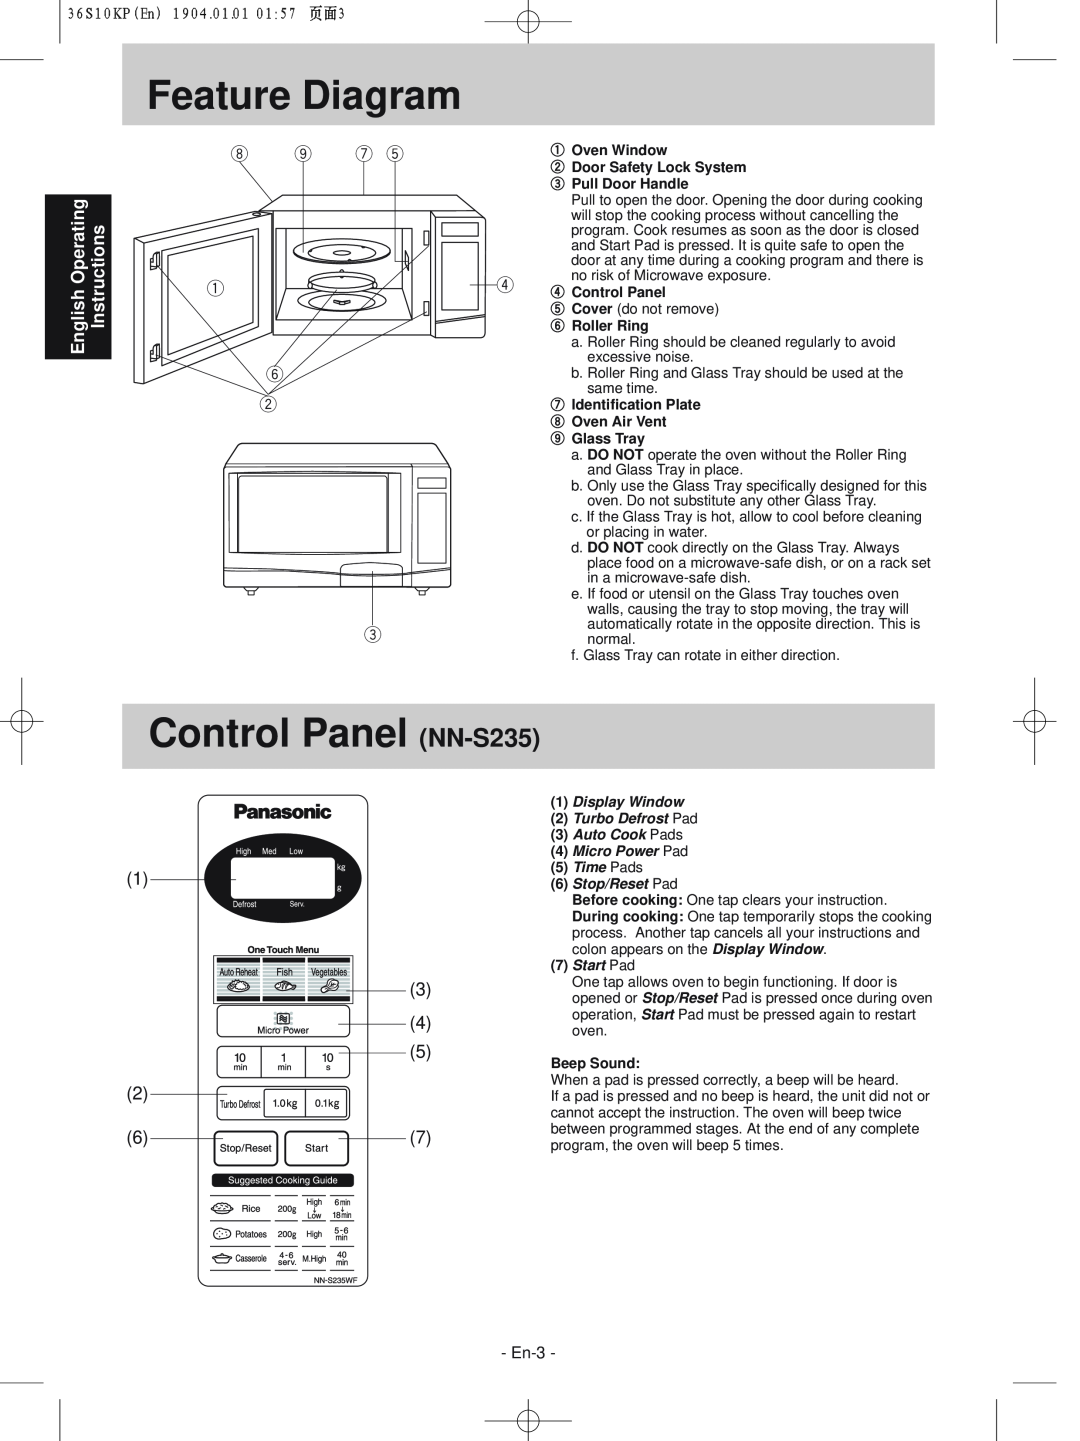 Panasonic NN-S235WF Feature Diagram, Control Panel NN-S235, Instructions, English Operating, Display Window, Time Pads 